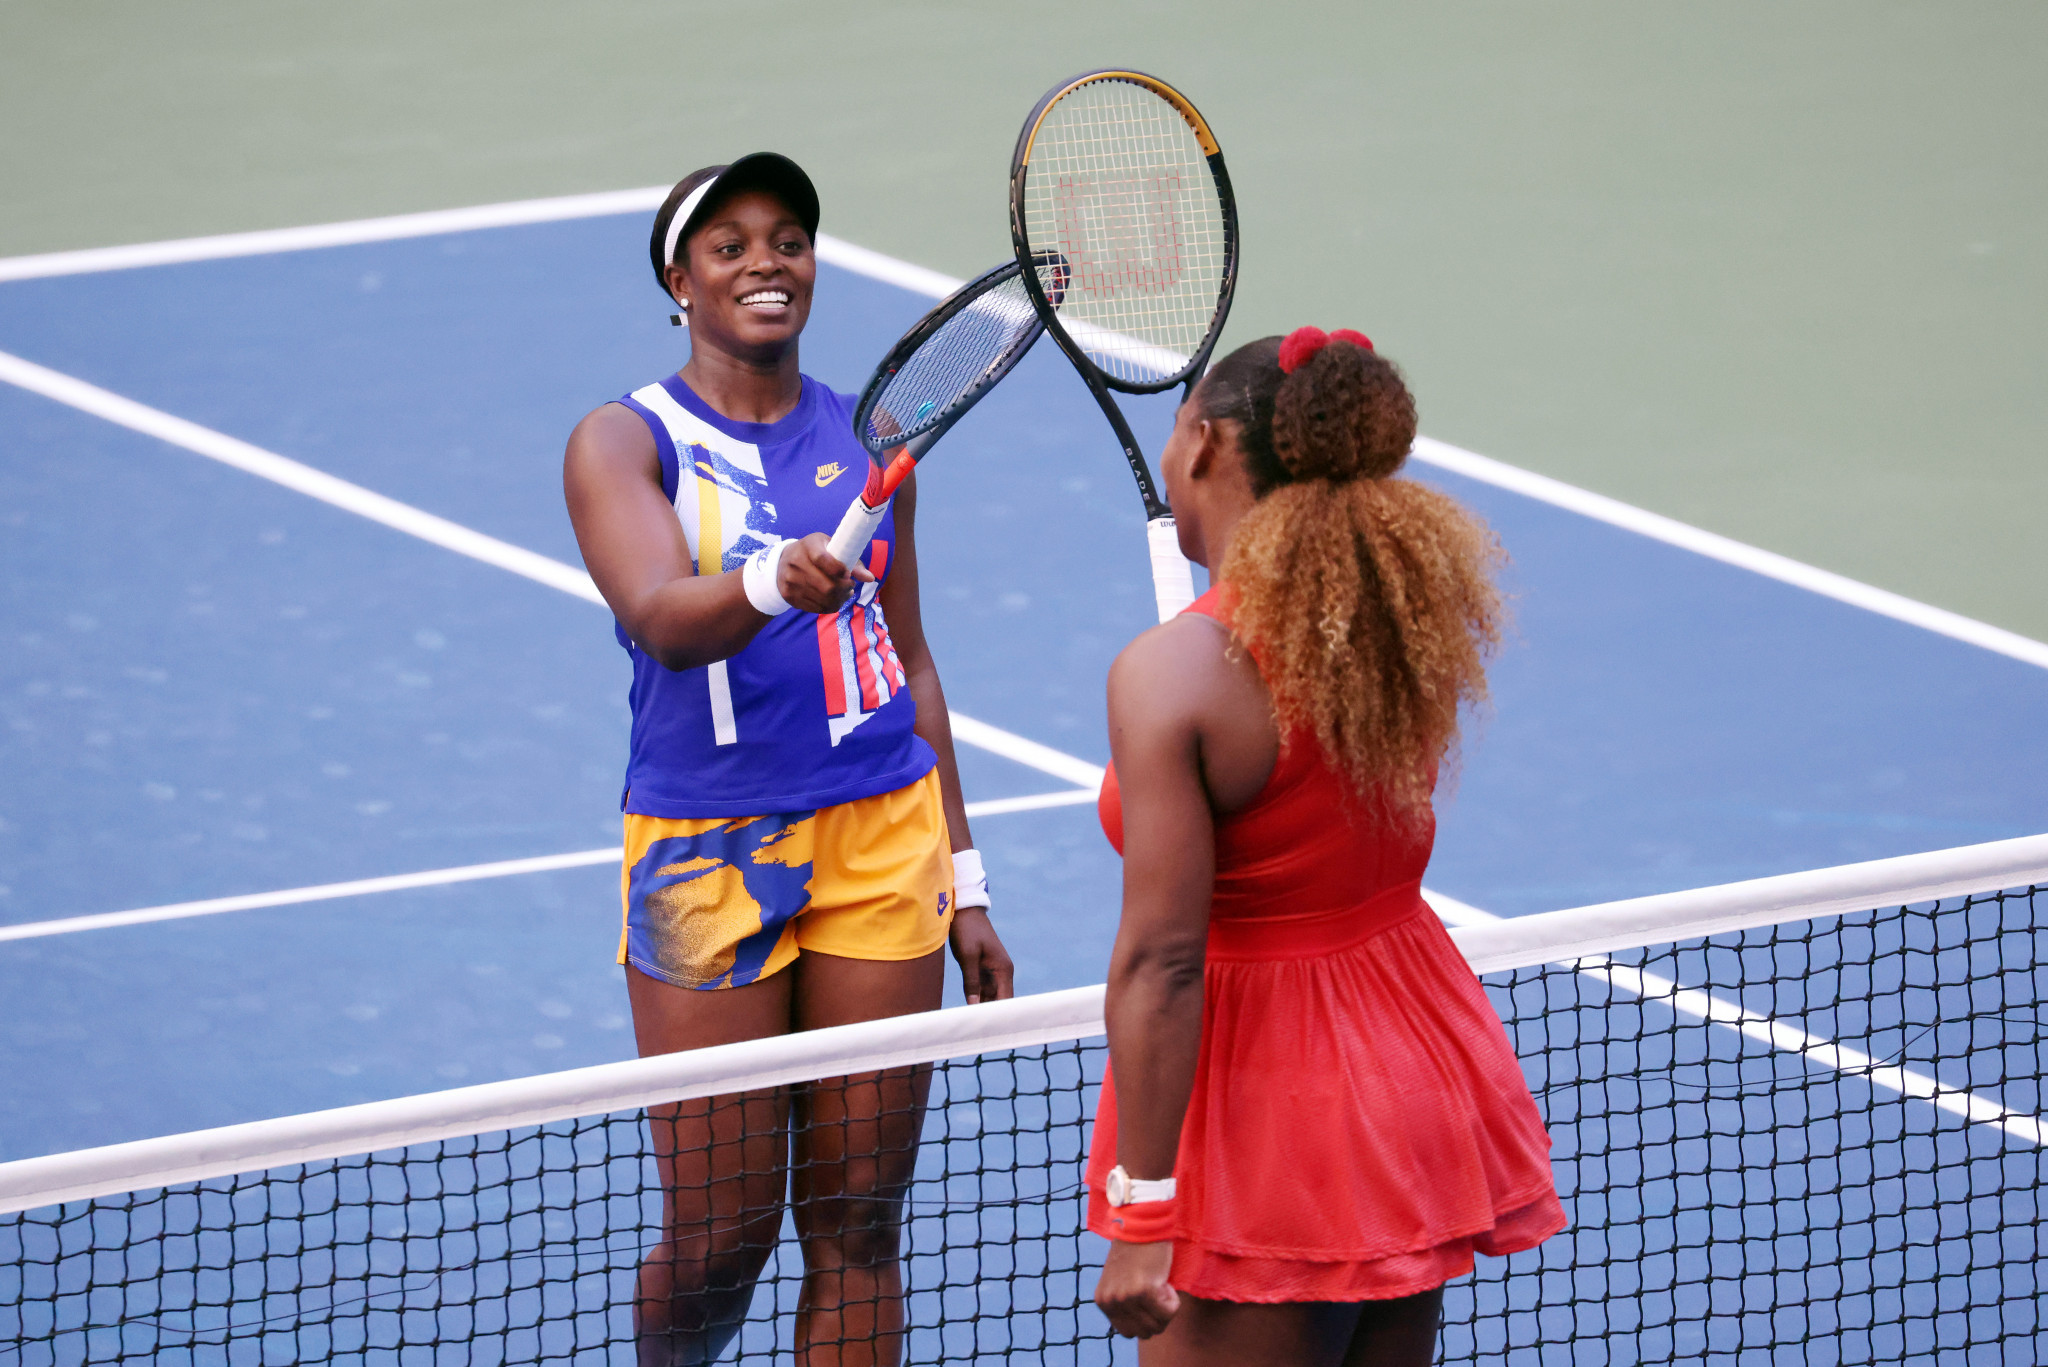 Serena Williams, in red, kept alive her hopes of a 24th Grand Slam with victory over fellow American Sloane Stephens to reach the last 16 of the US Open in New York City ©Getty Images